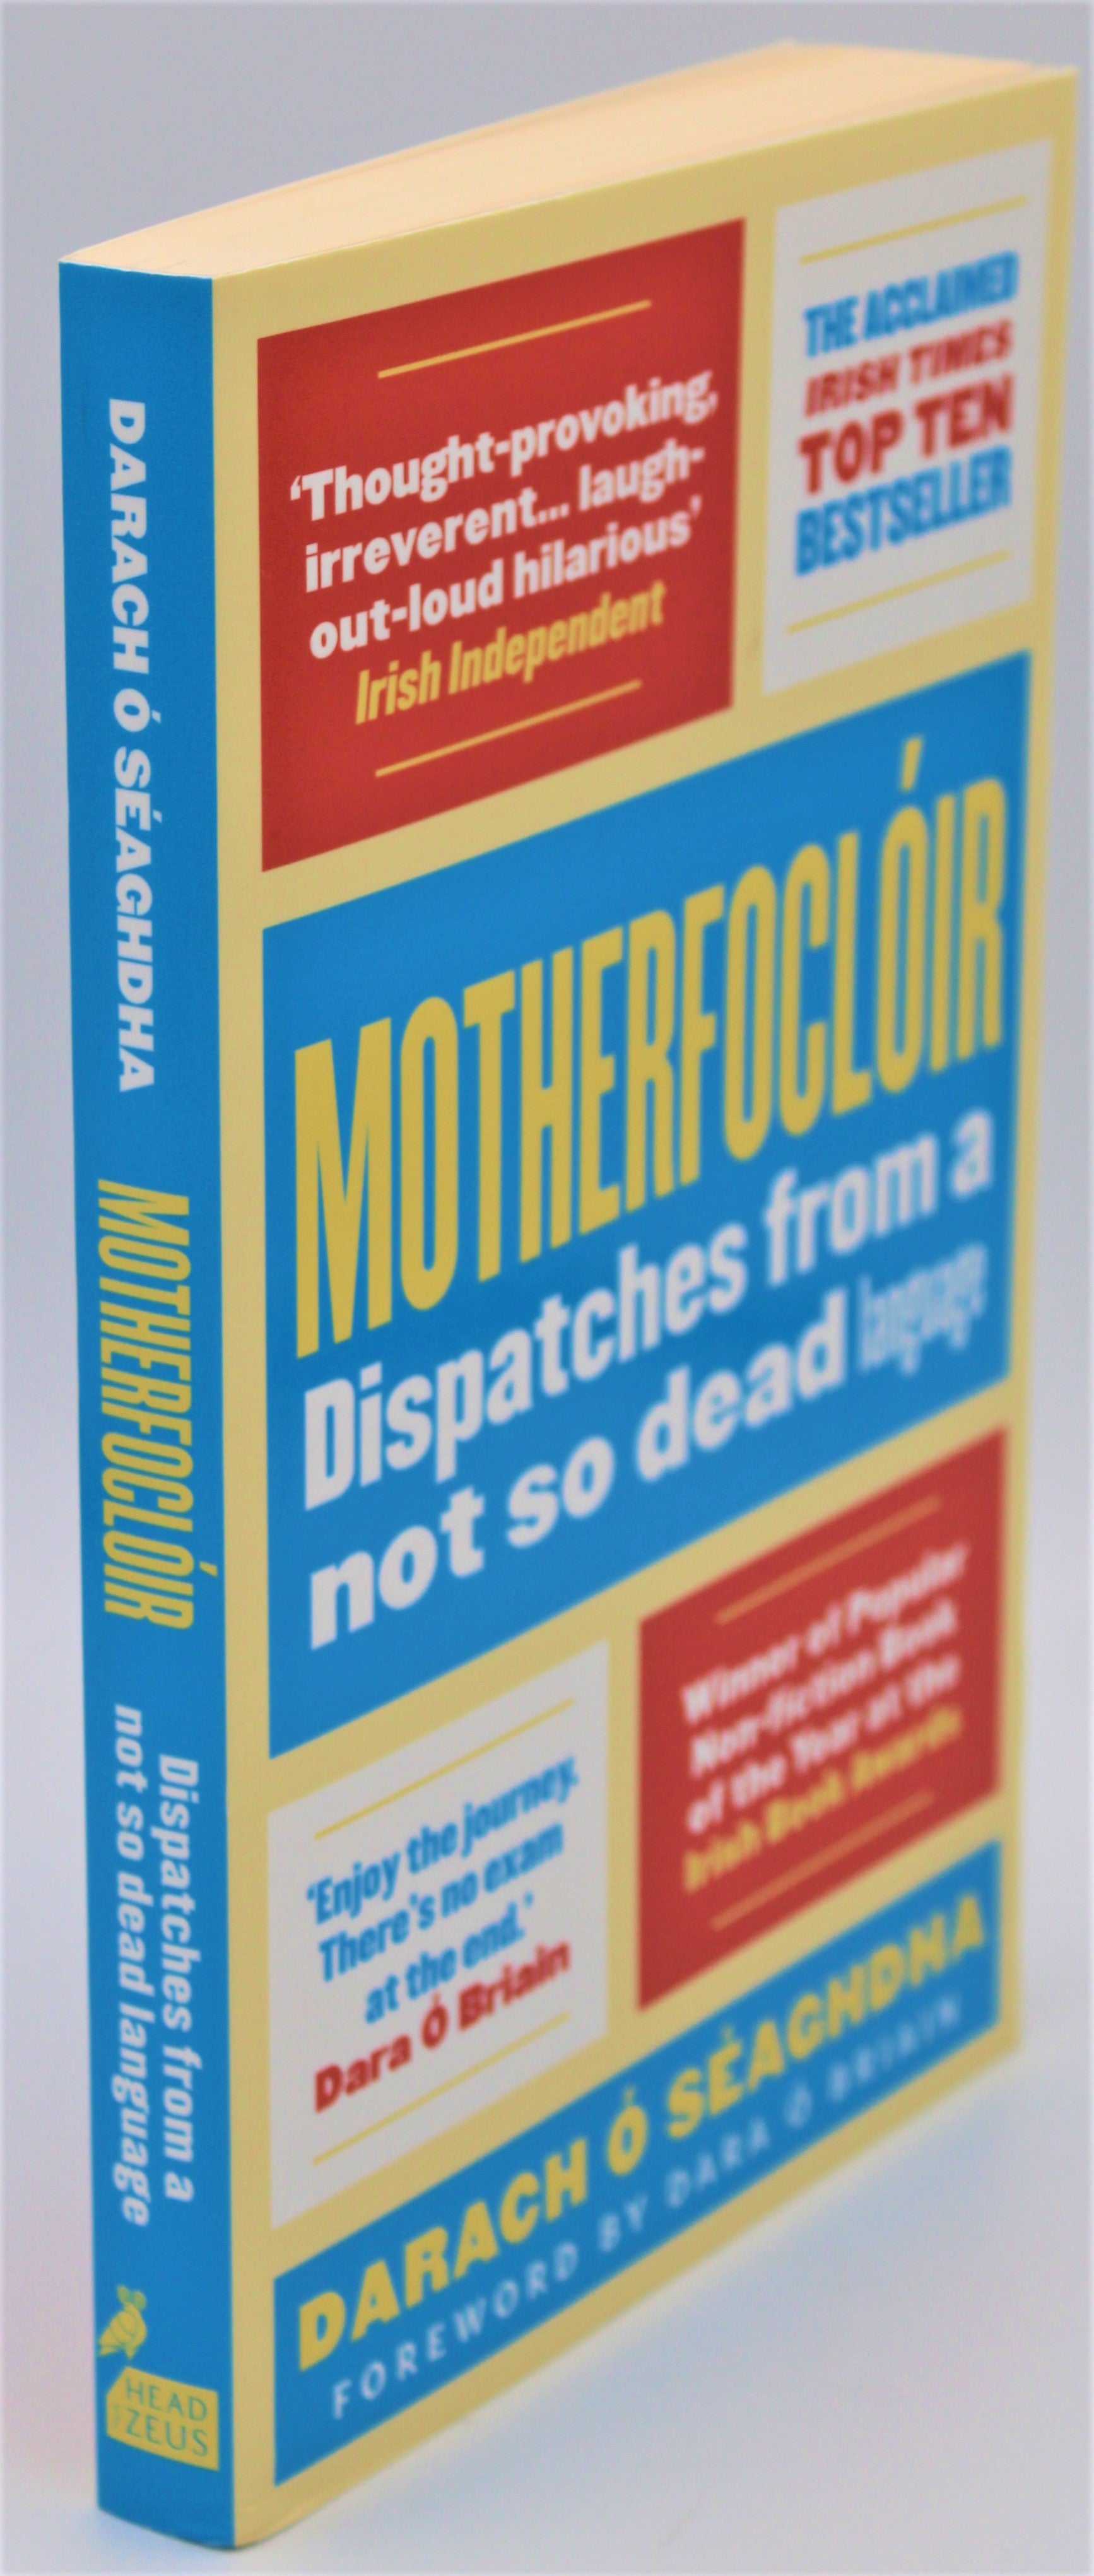 Side View of Motherfoclóir: Dispatches of a Not So Dead Language